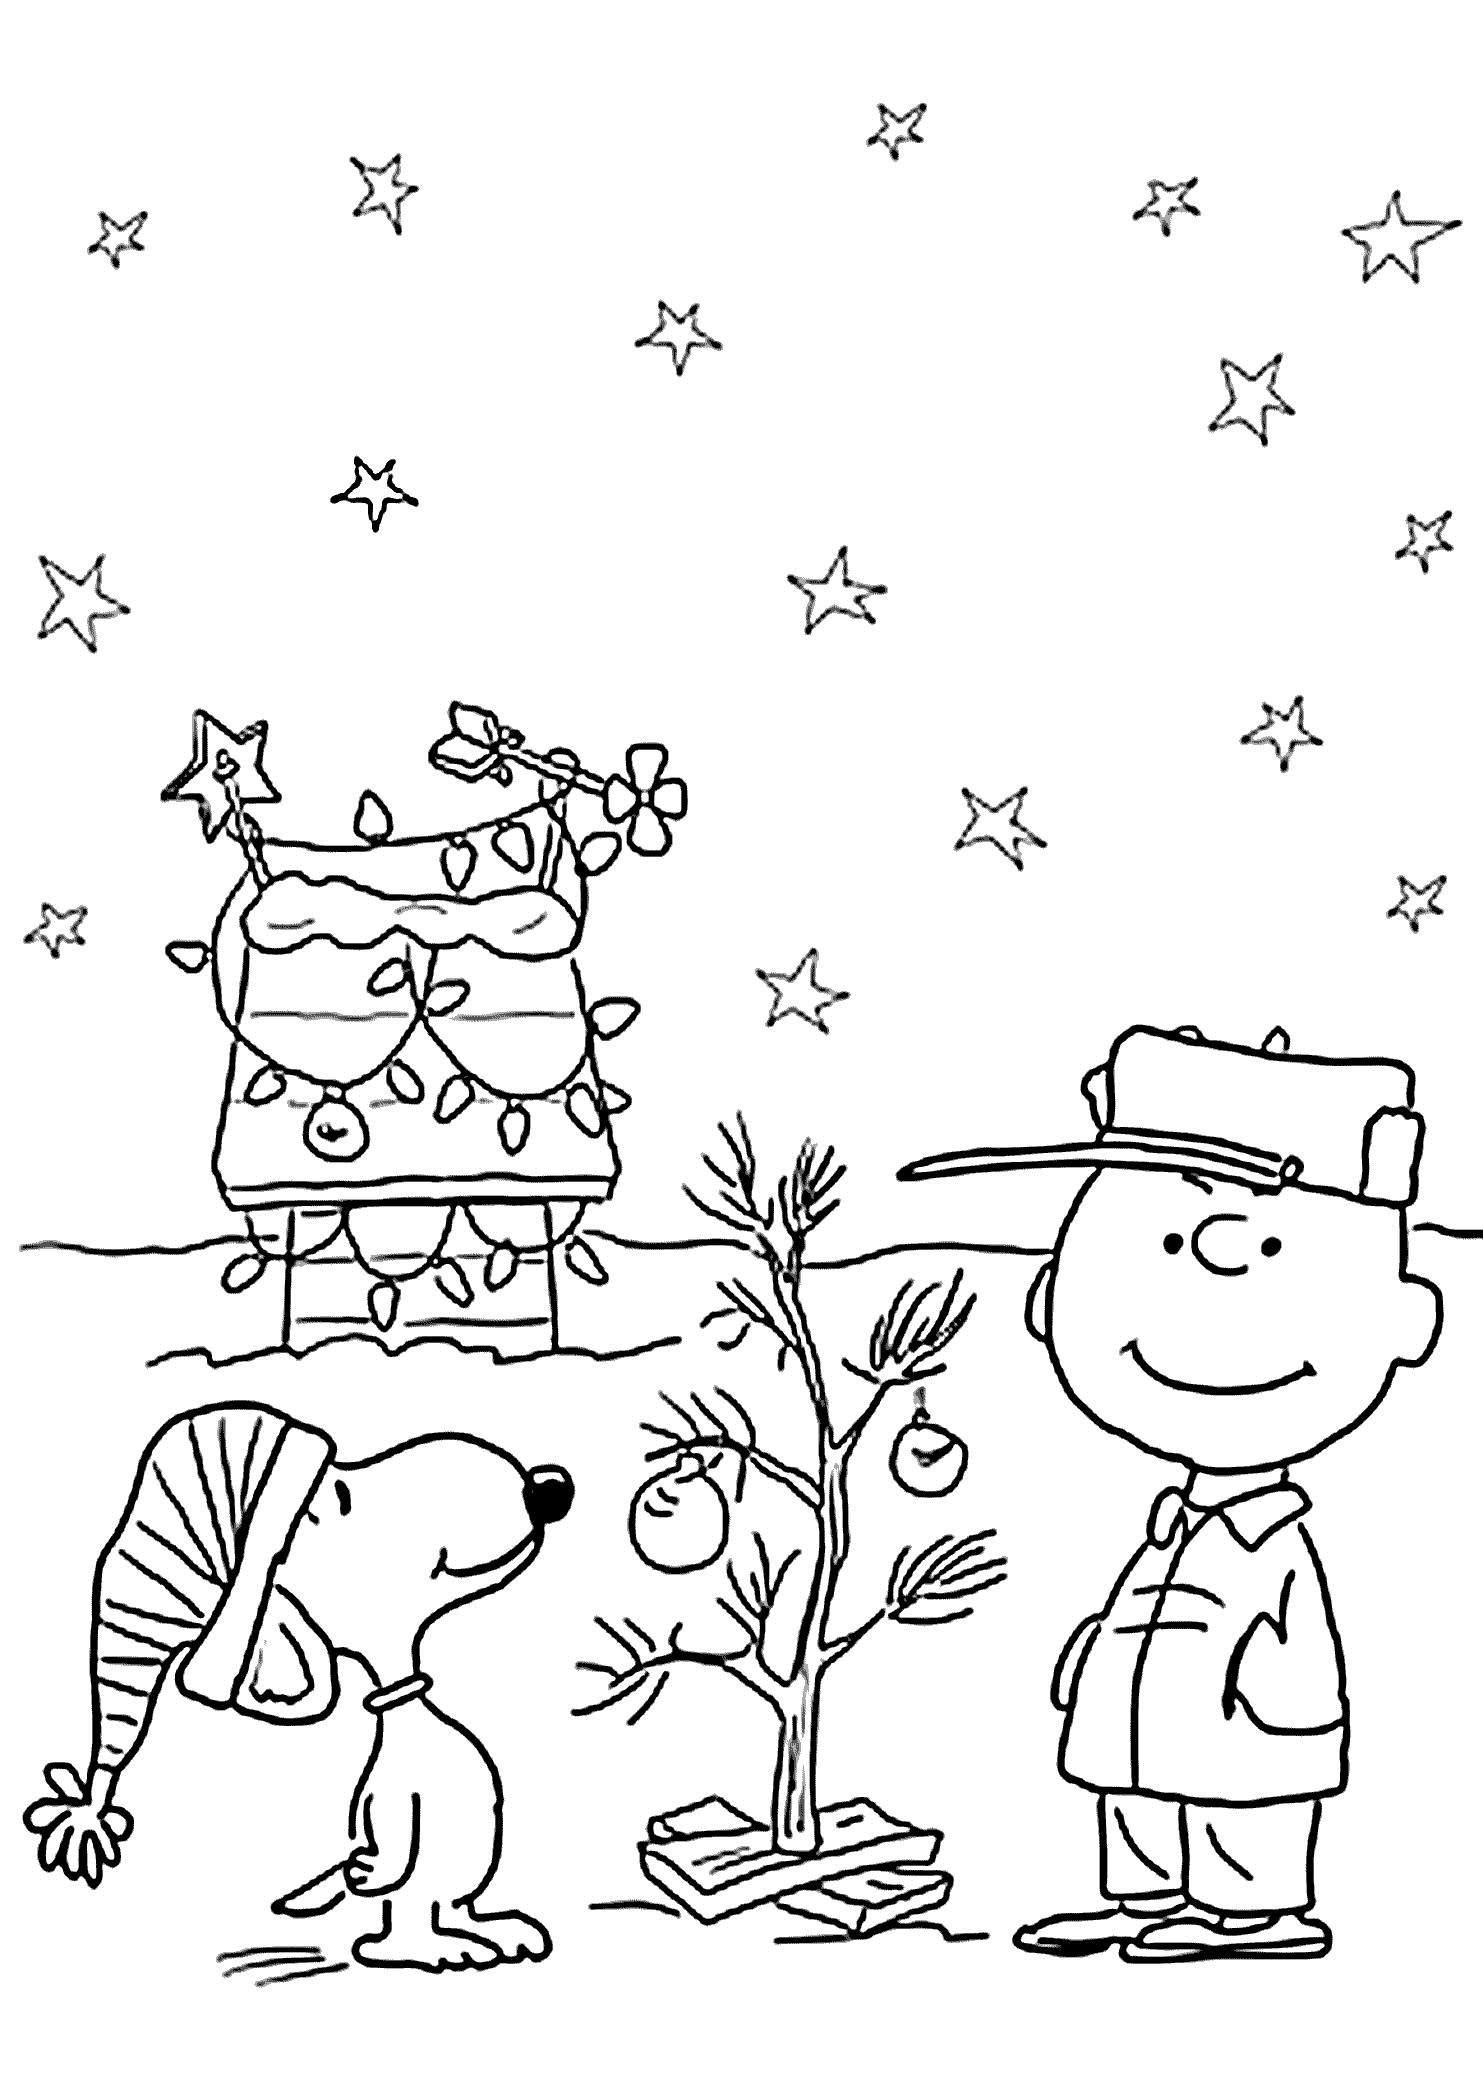 Free Christmas Printable Coloring Pages Coloring Ideas Christmas Coloring Pages Printable With Pictures